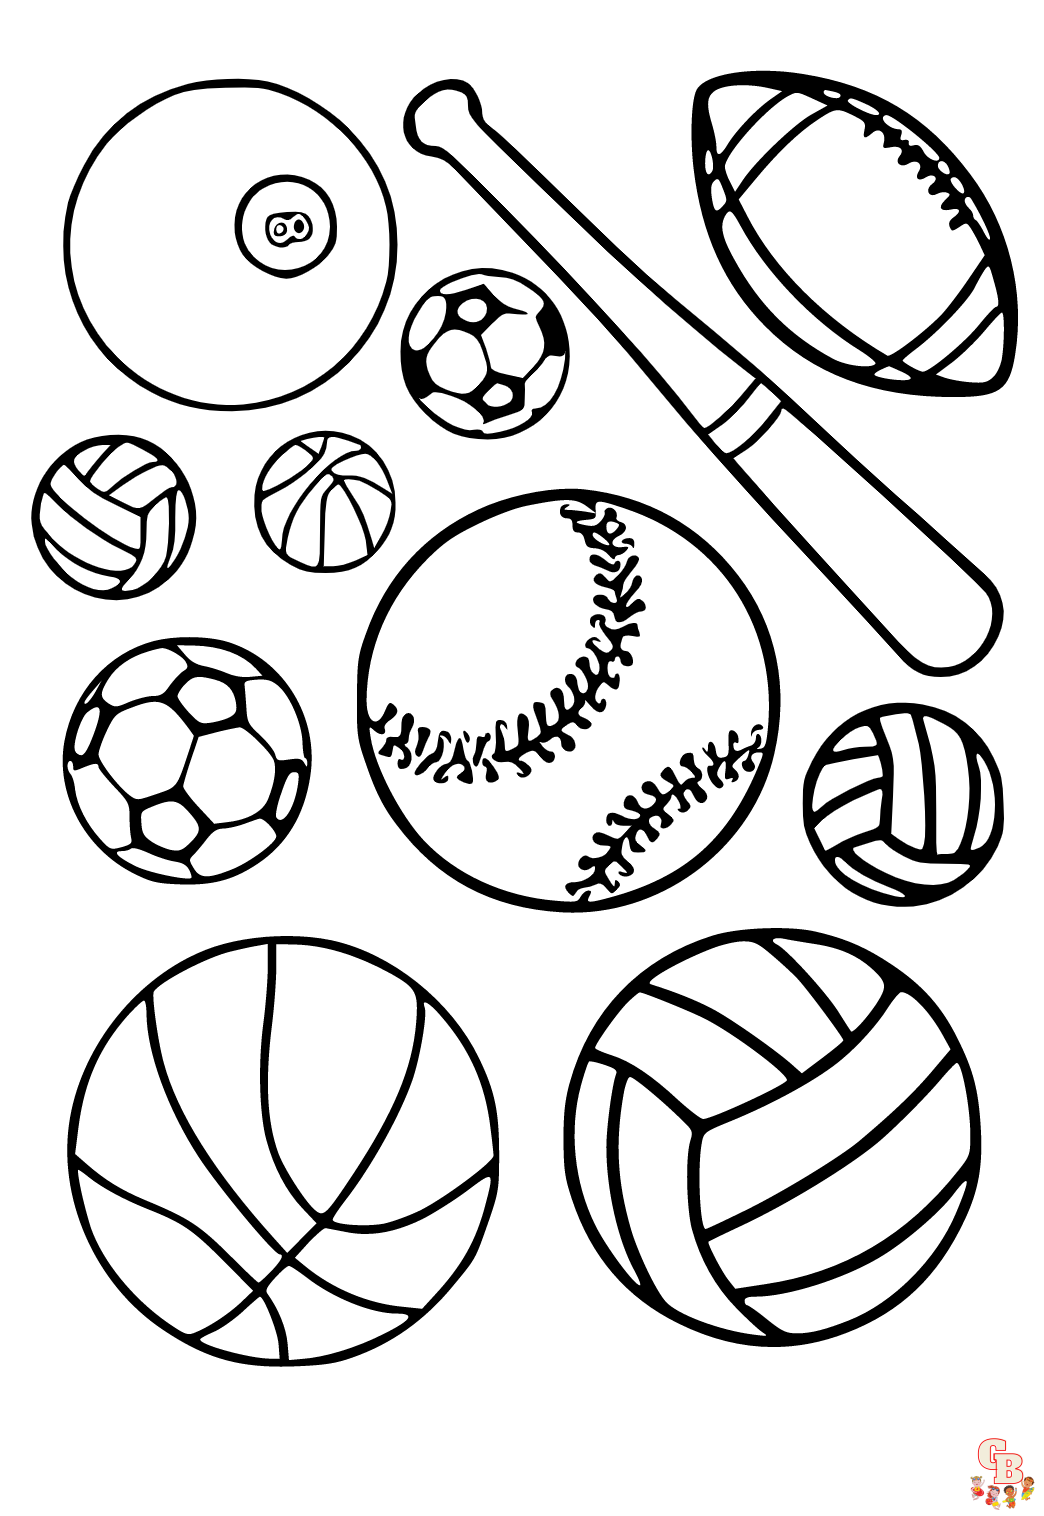 Balls coloring pages free printable sheets for kids